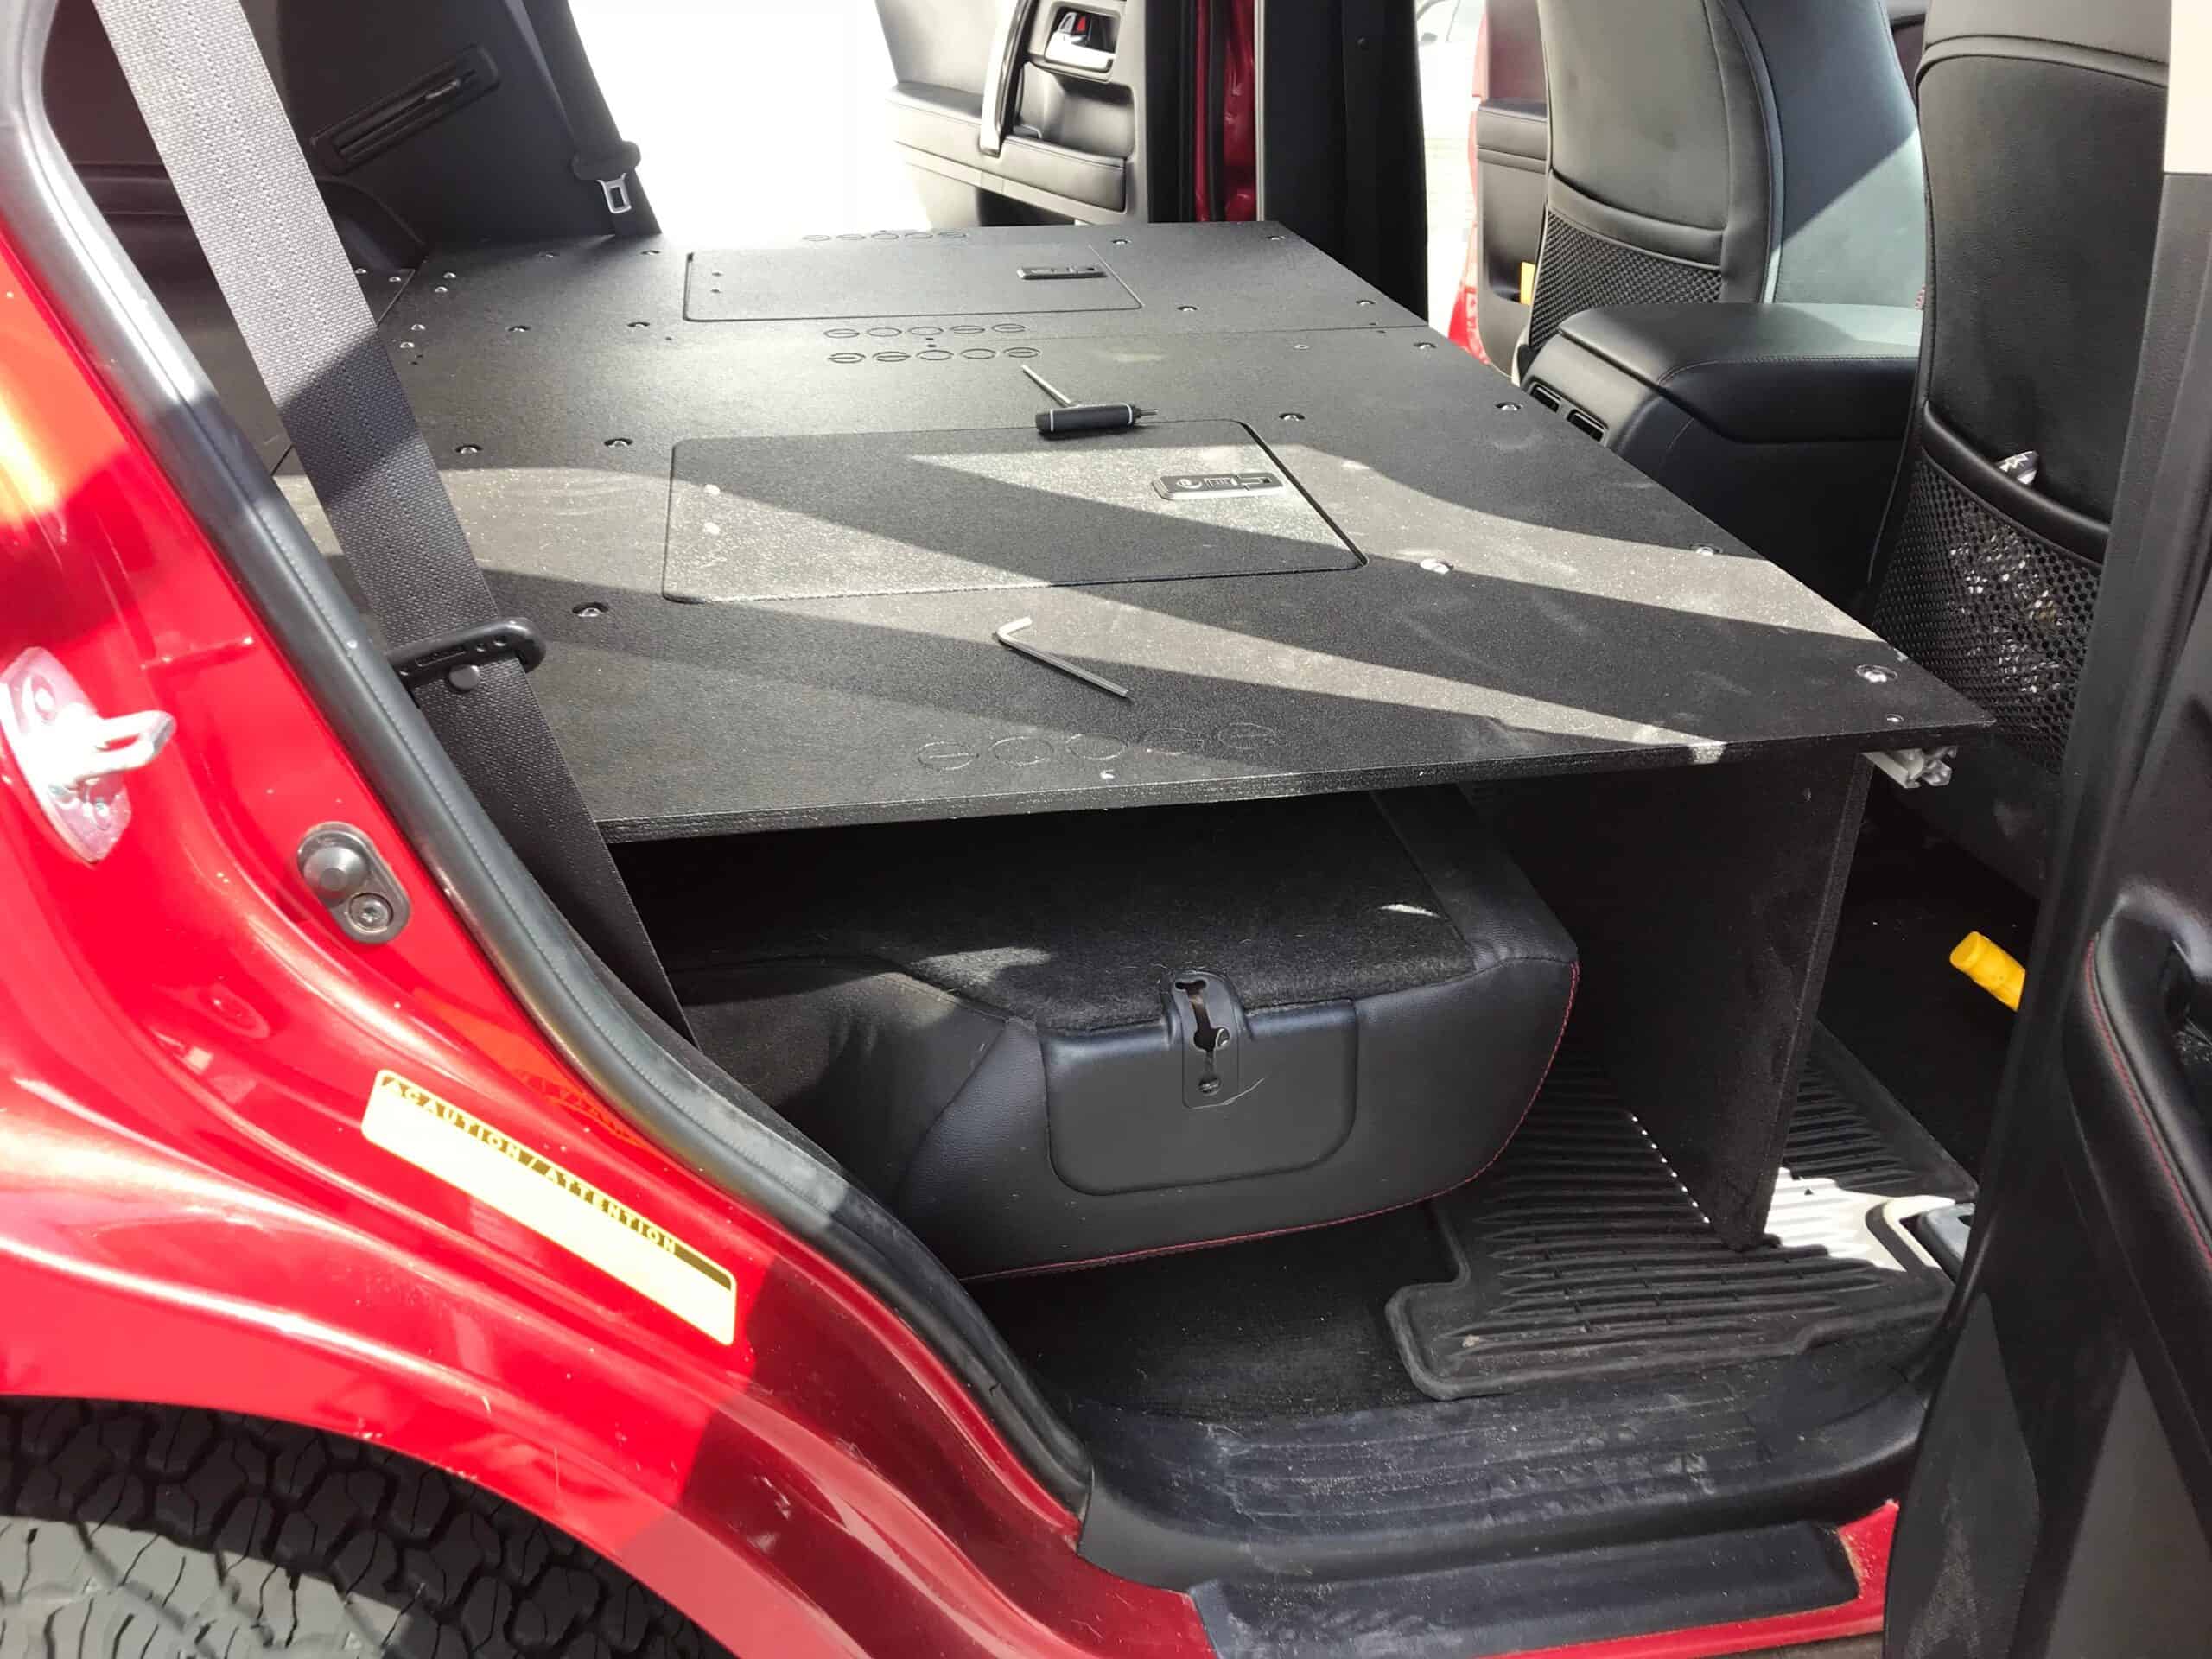 Toyota 4Runner 2010-Present 5th Gen. - Second Row Seat Delete Plate System - Module Height